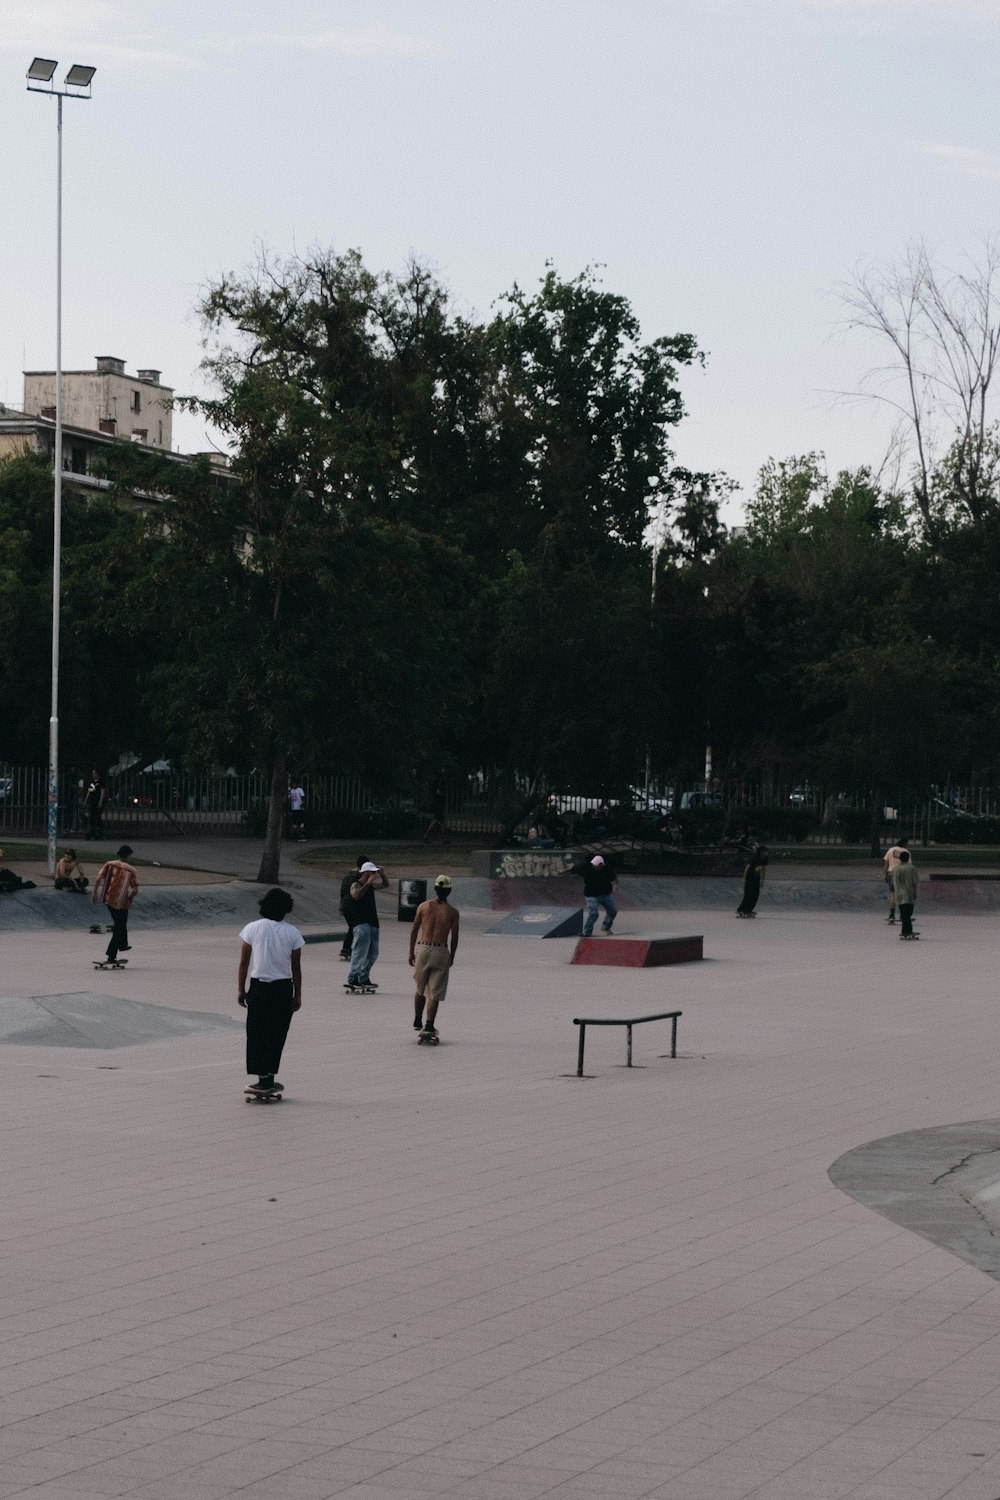 a group of people walking around a skate park